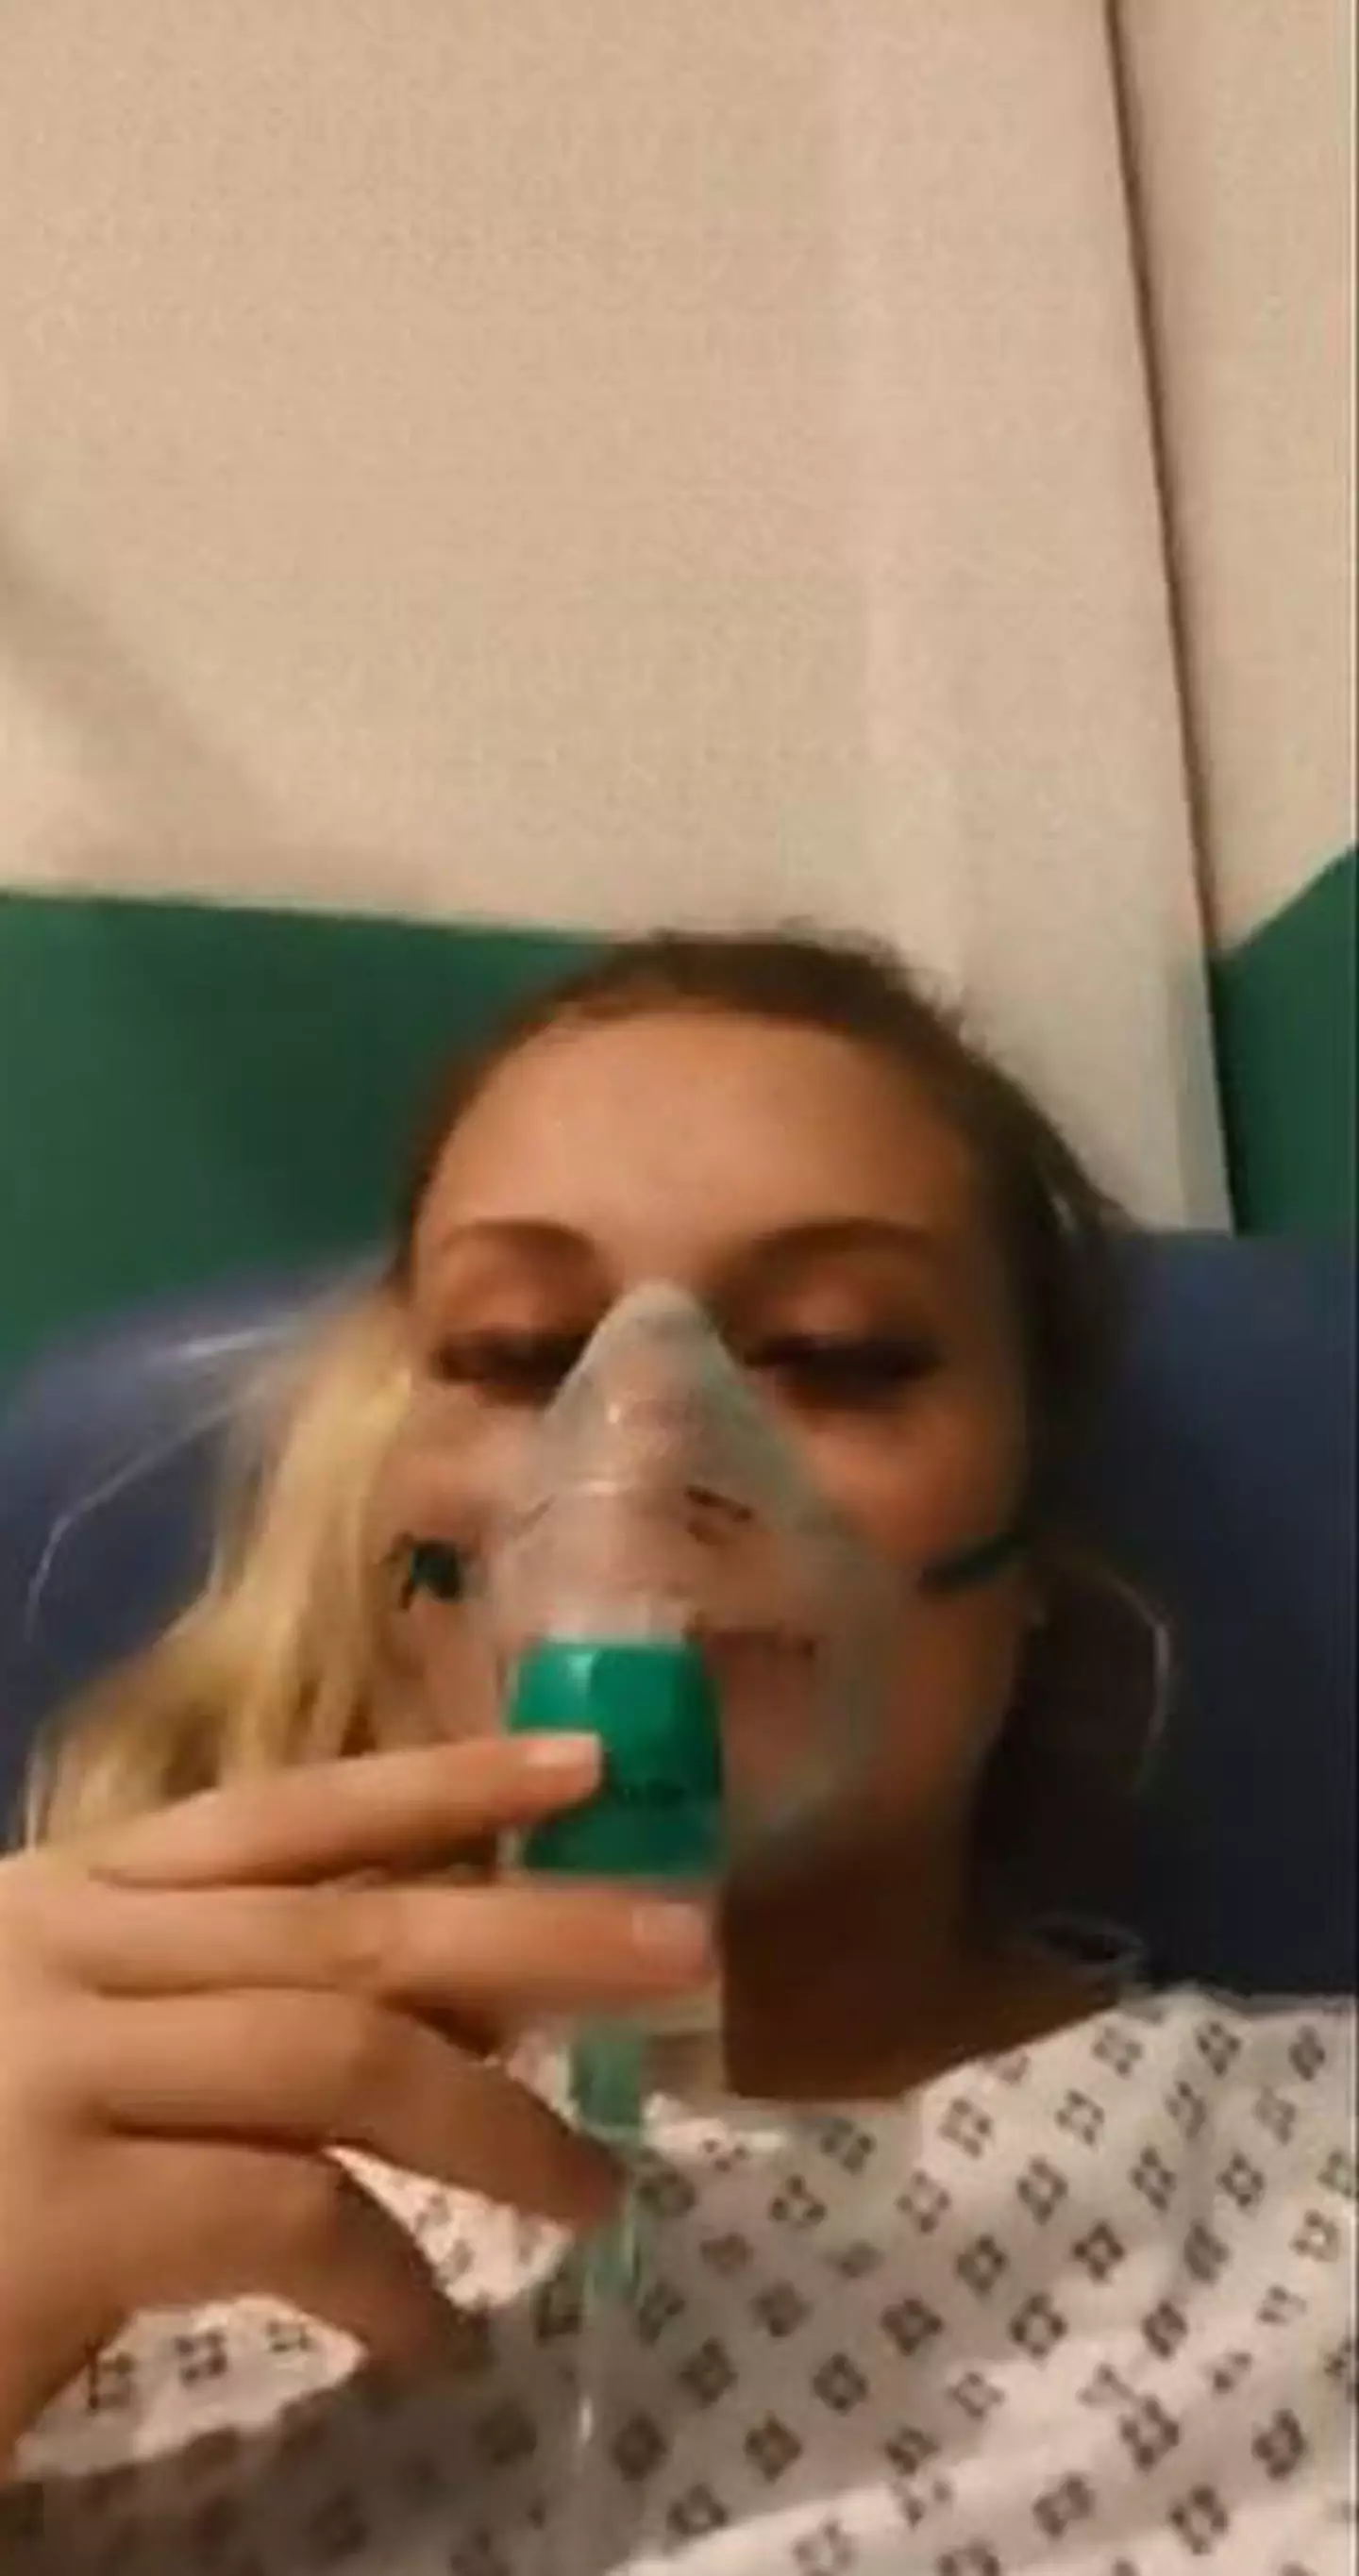 Abby was hospitalised after suddenly struggling to breathe.